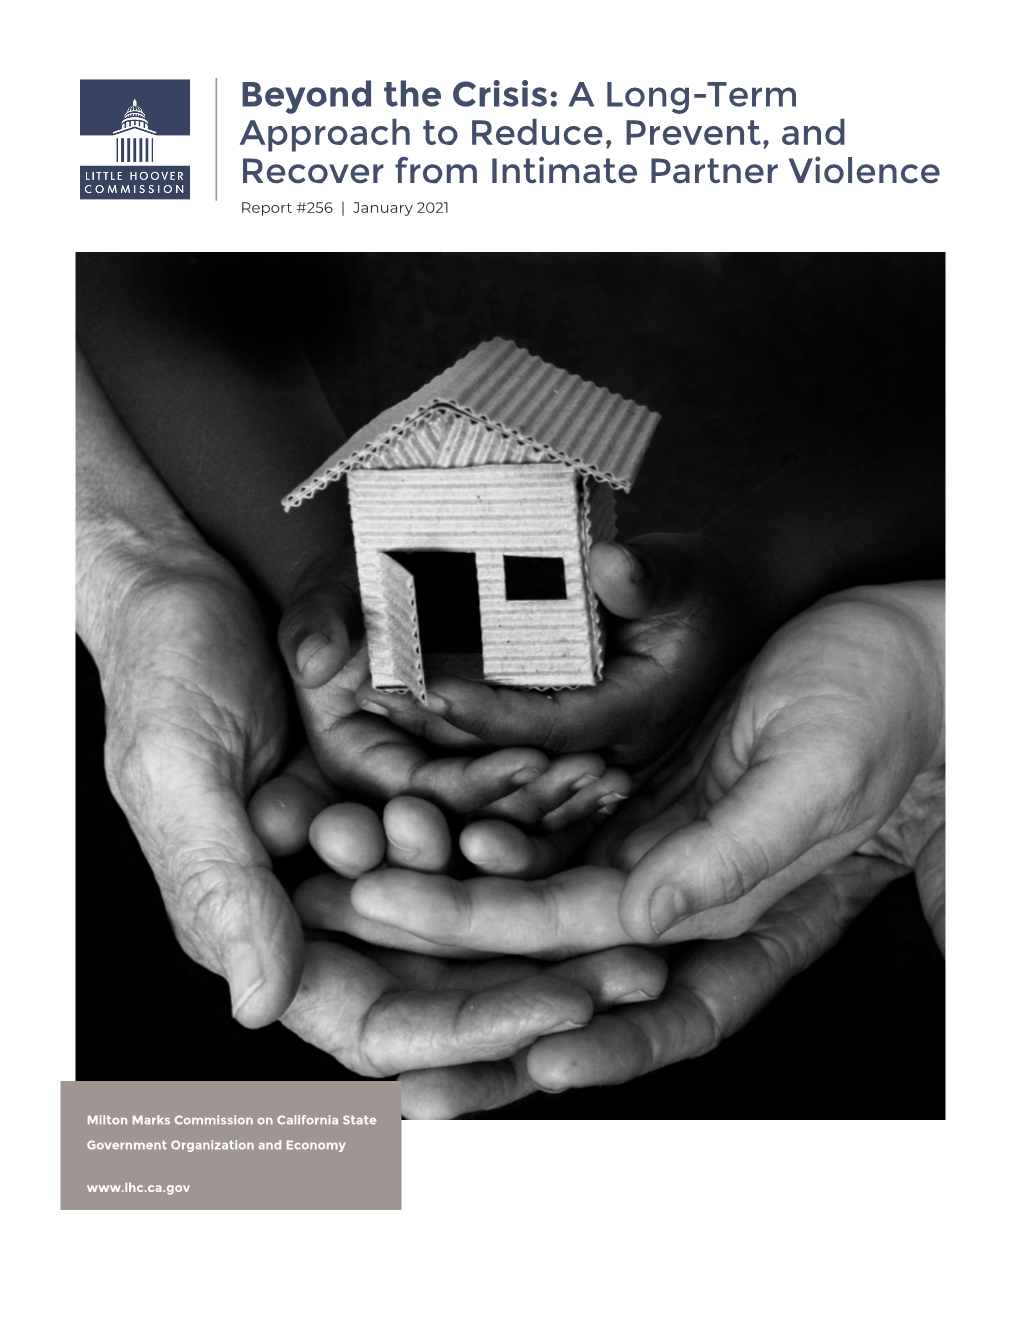 A Long-Term Approach to Reducing, Preventing, and Recovering from Intimate Partner Violence